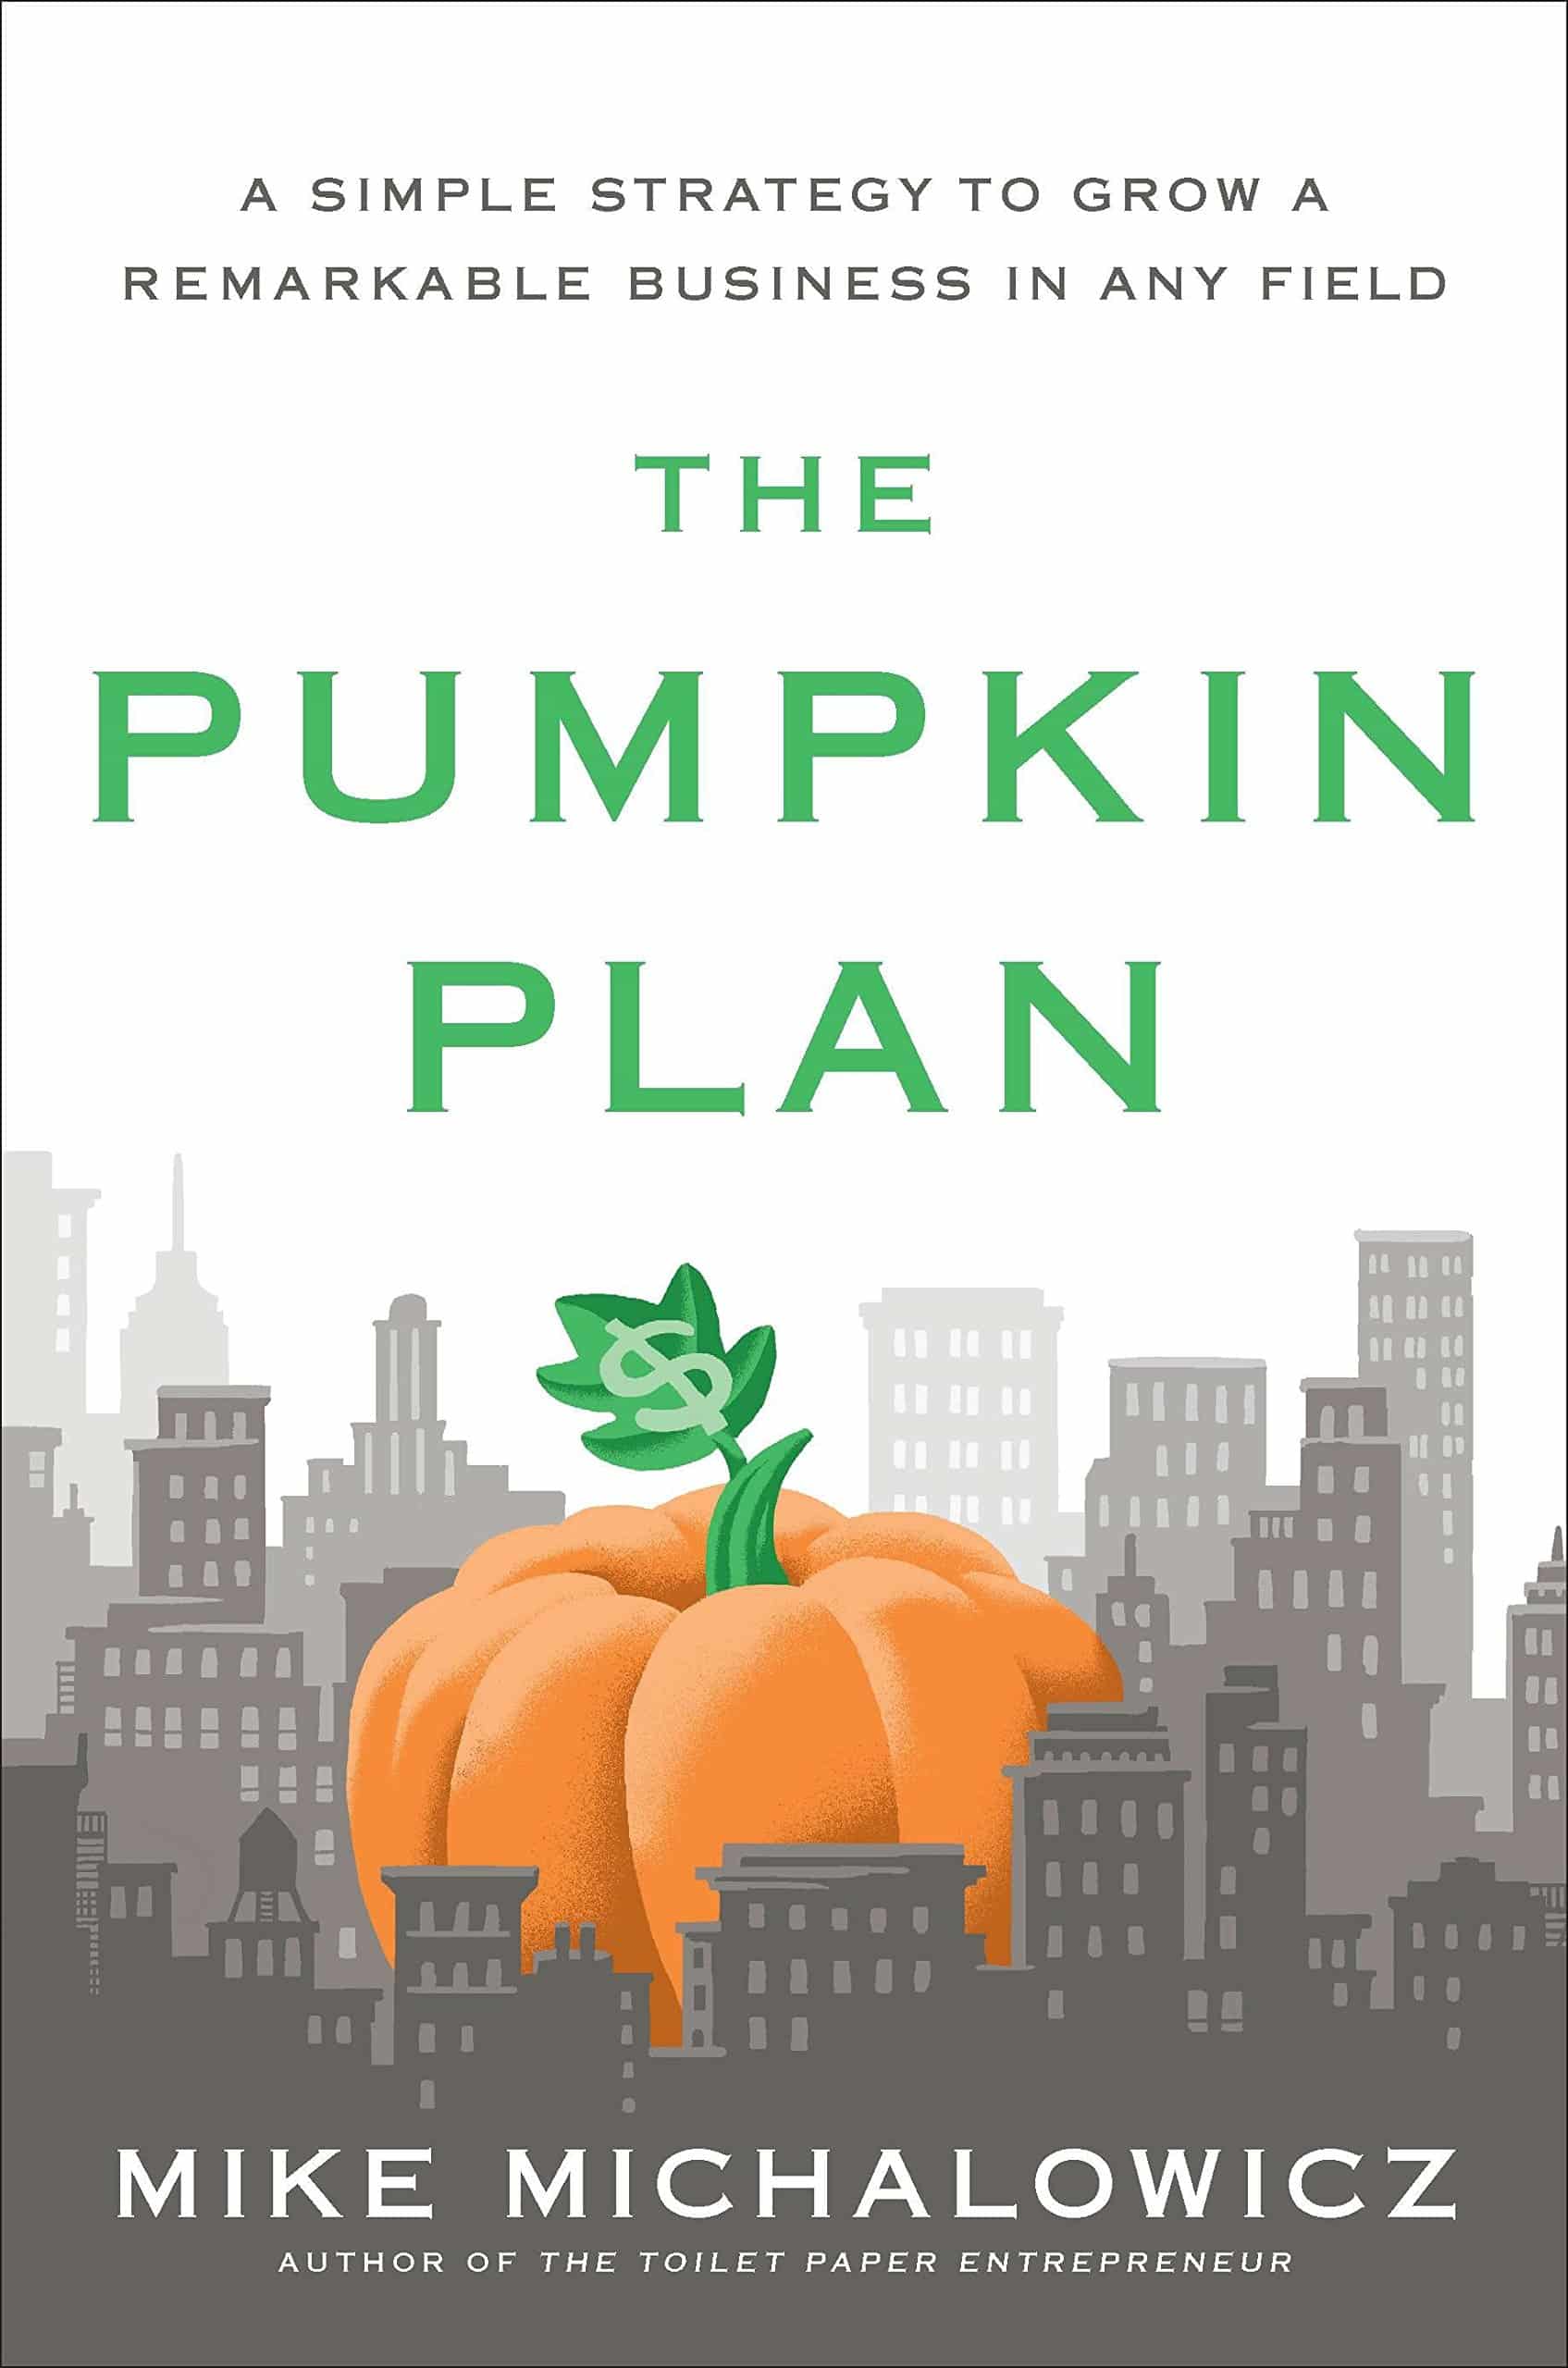 The Pumpkin Plan written by Mike Michalowicz book cover